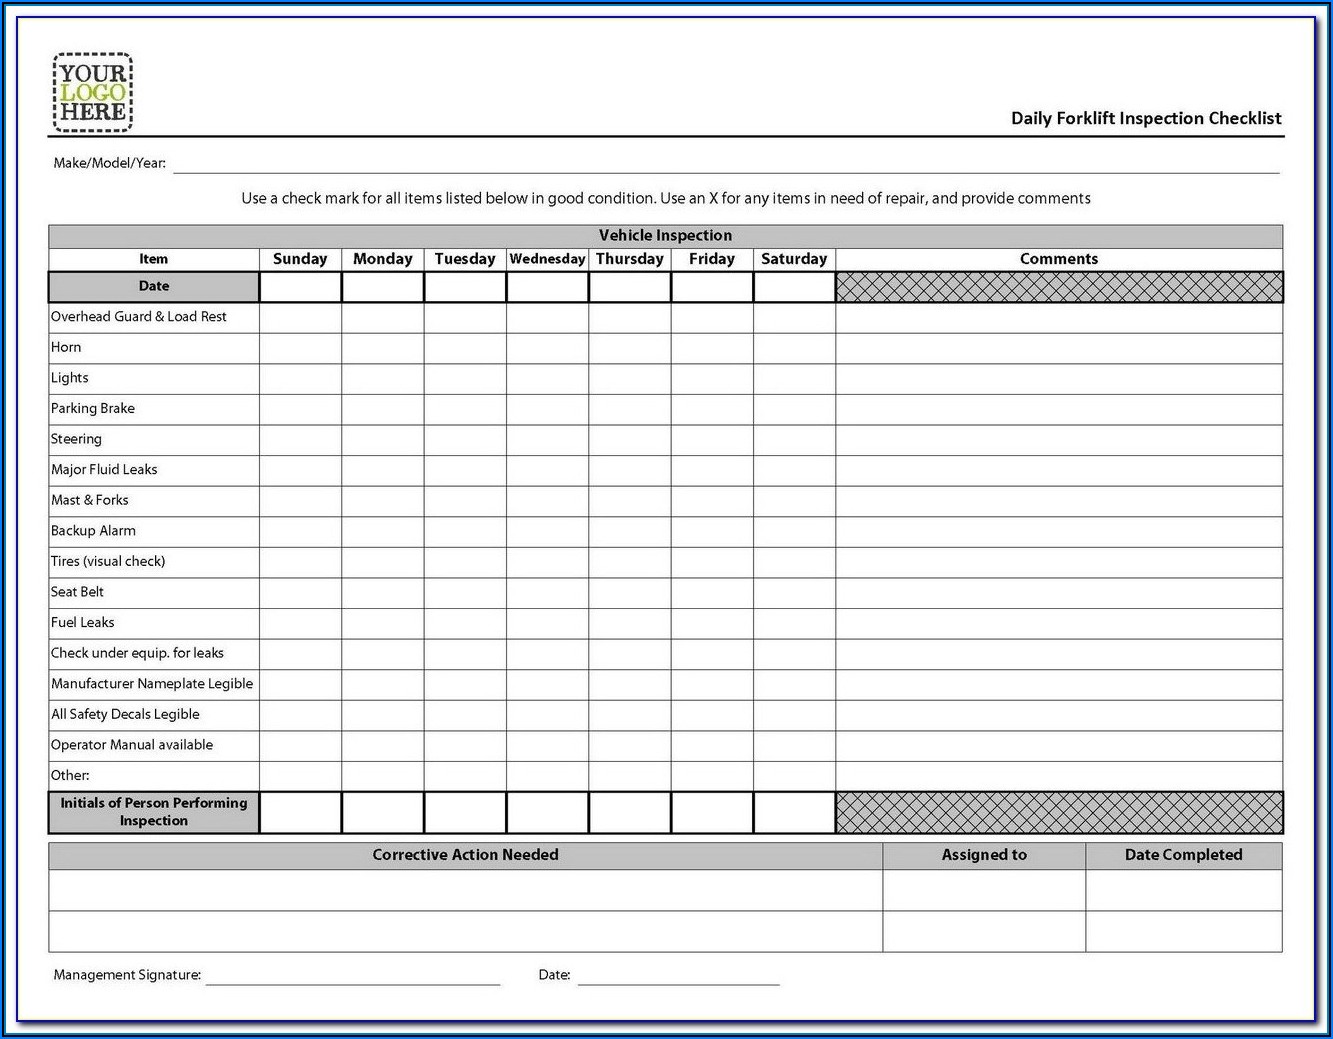 Daily Forklift Inspection Checklist Form